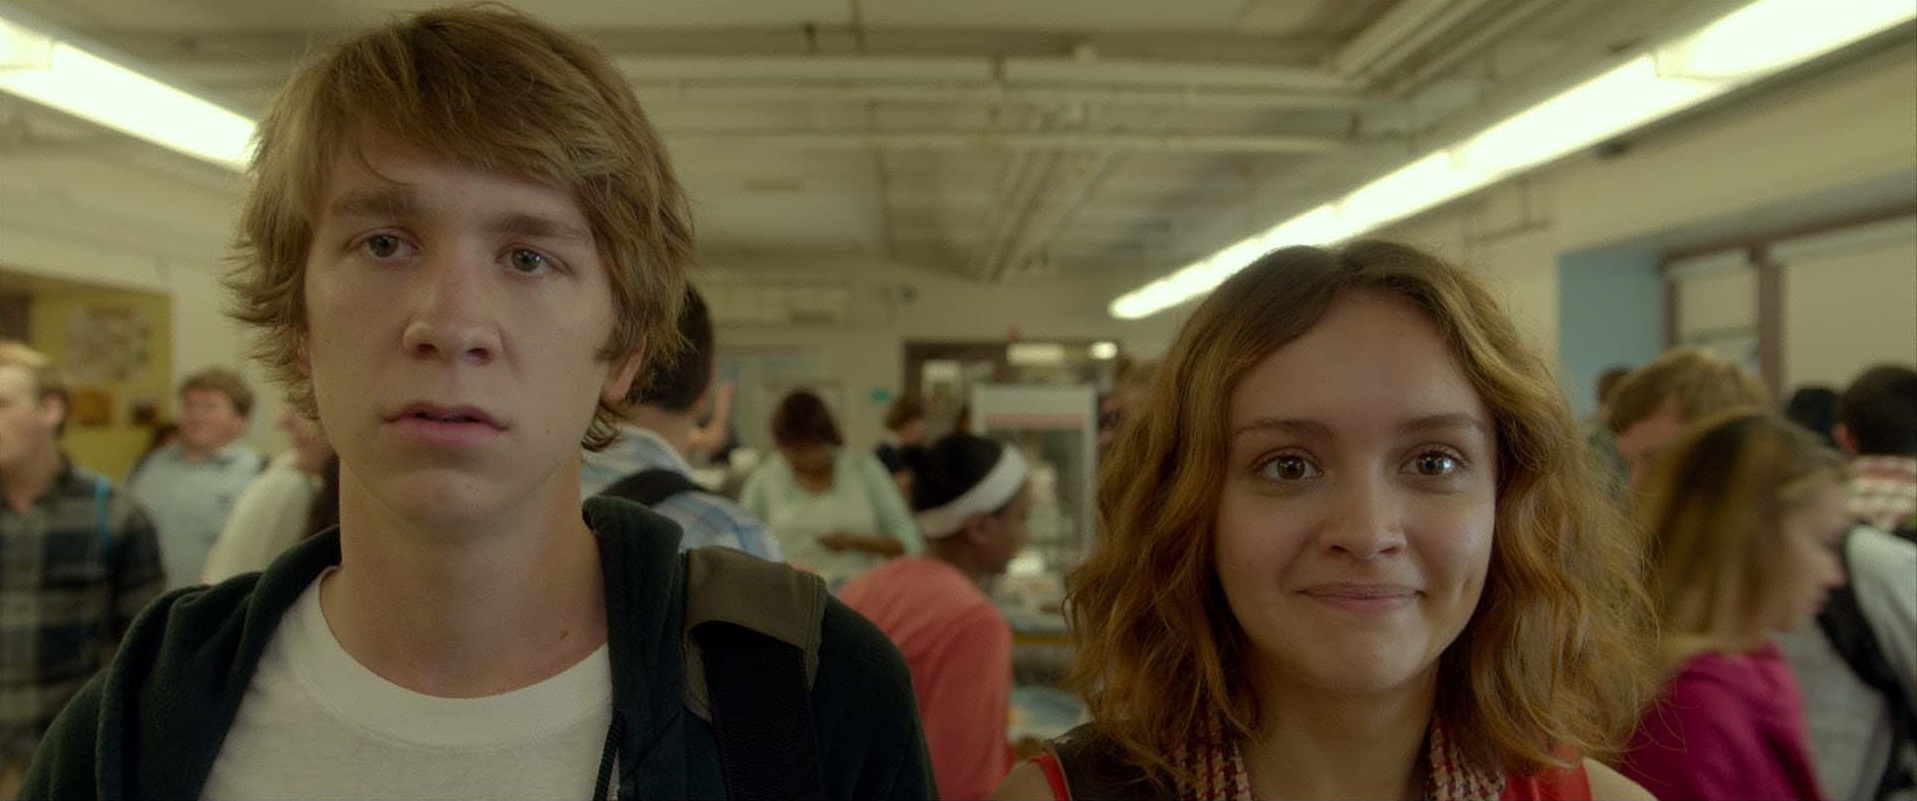 From novel to movie: ‘Me and Earl and the Dying Girl’